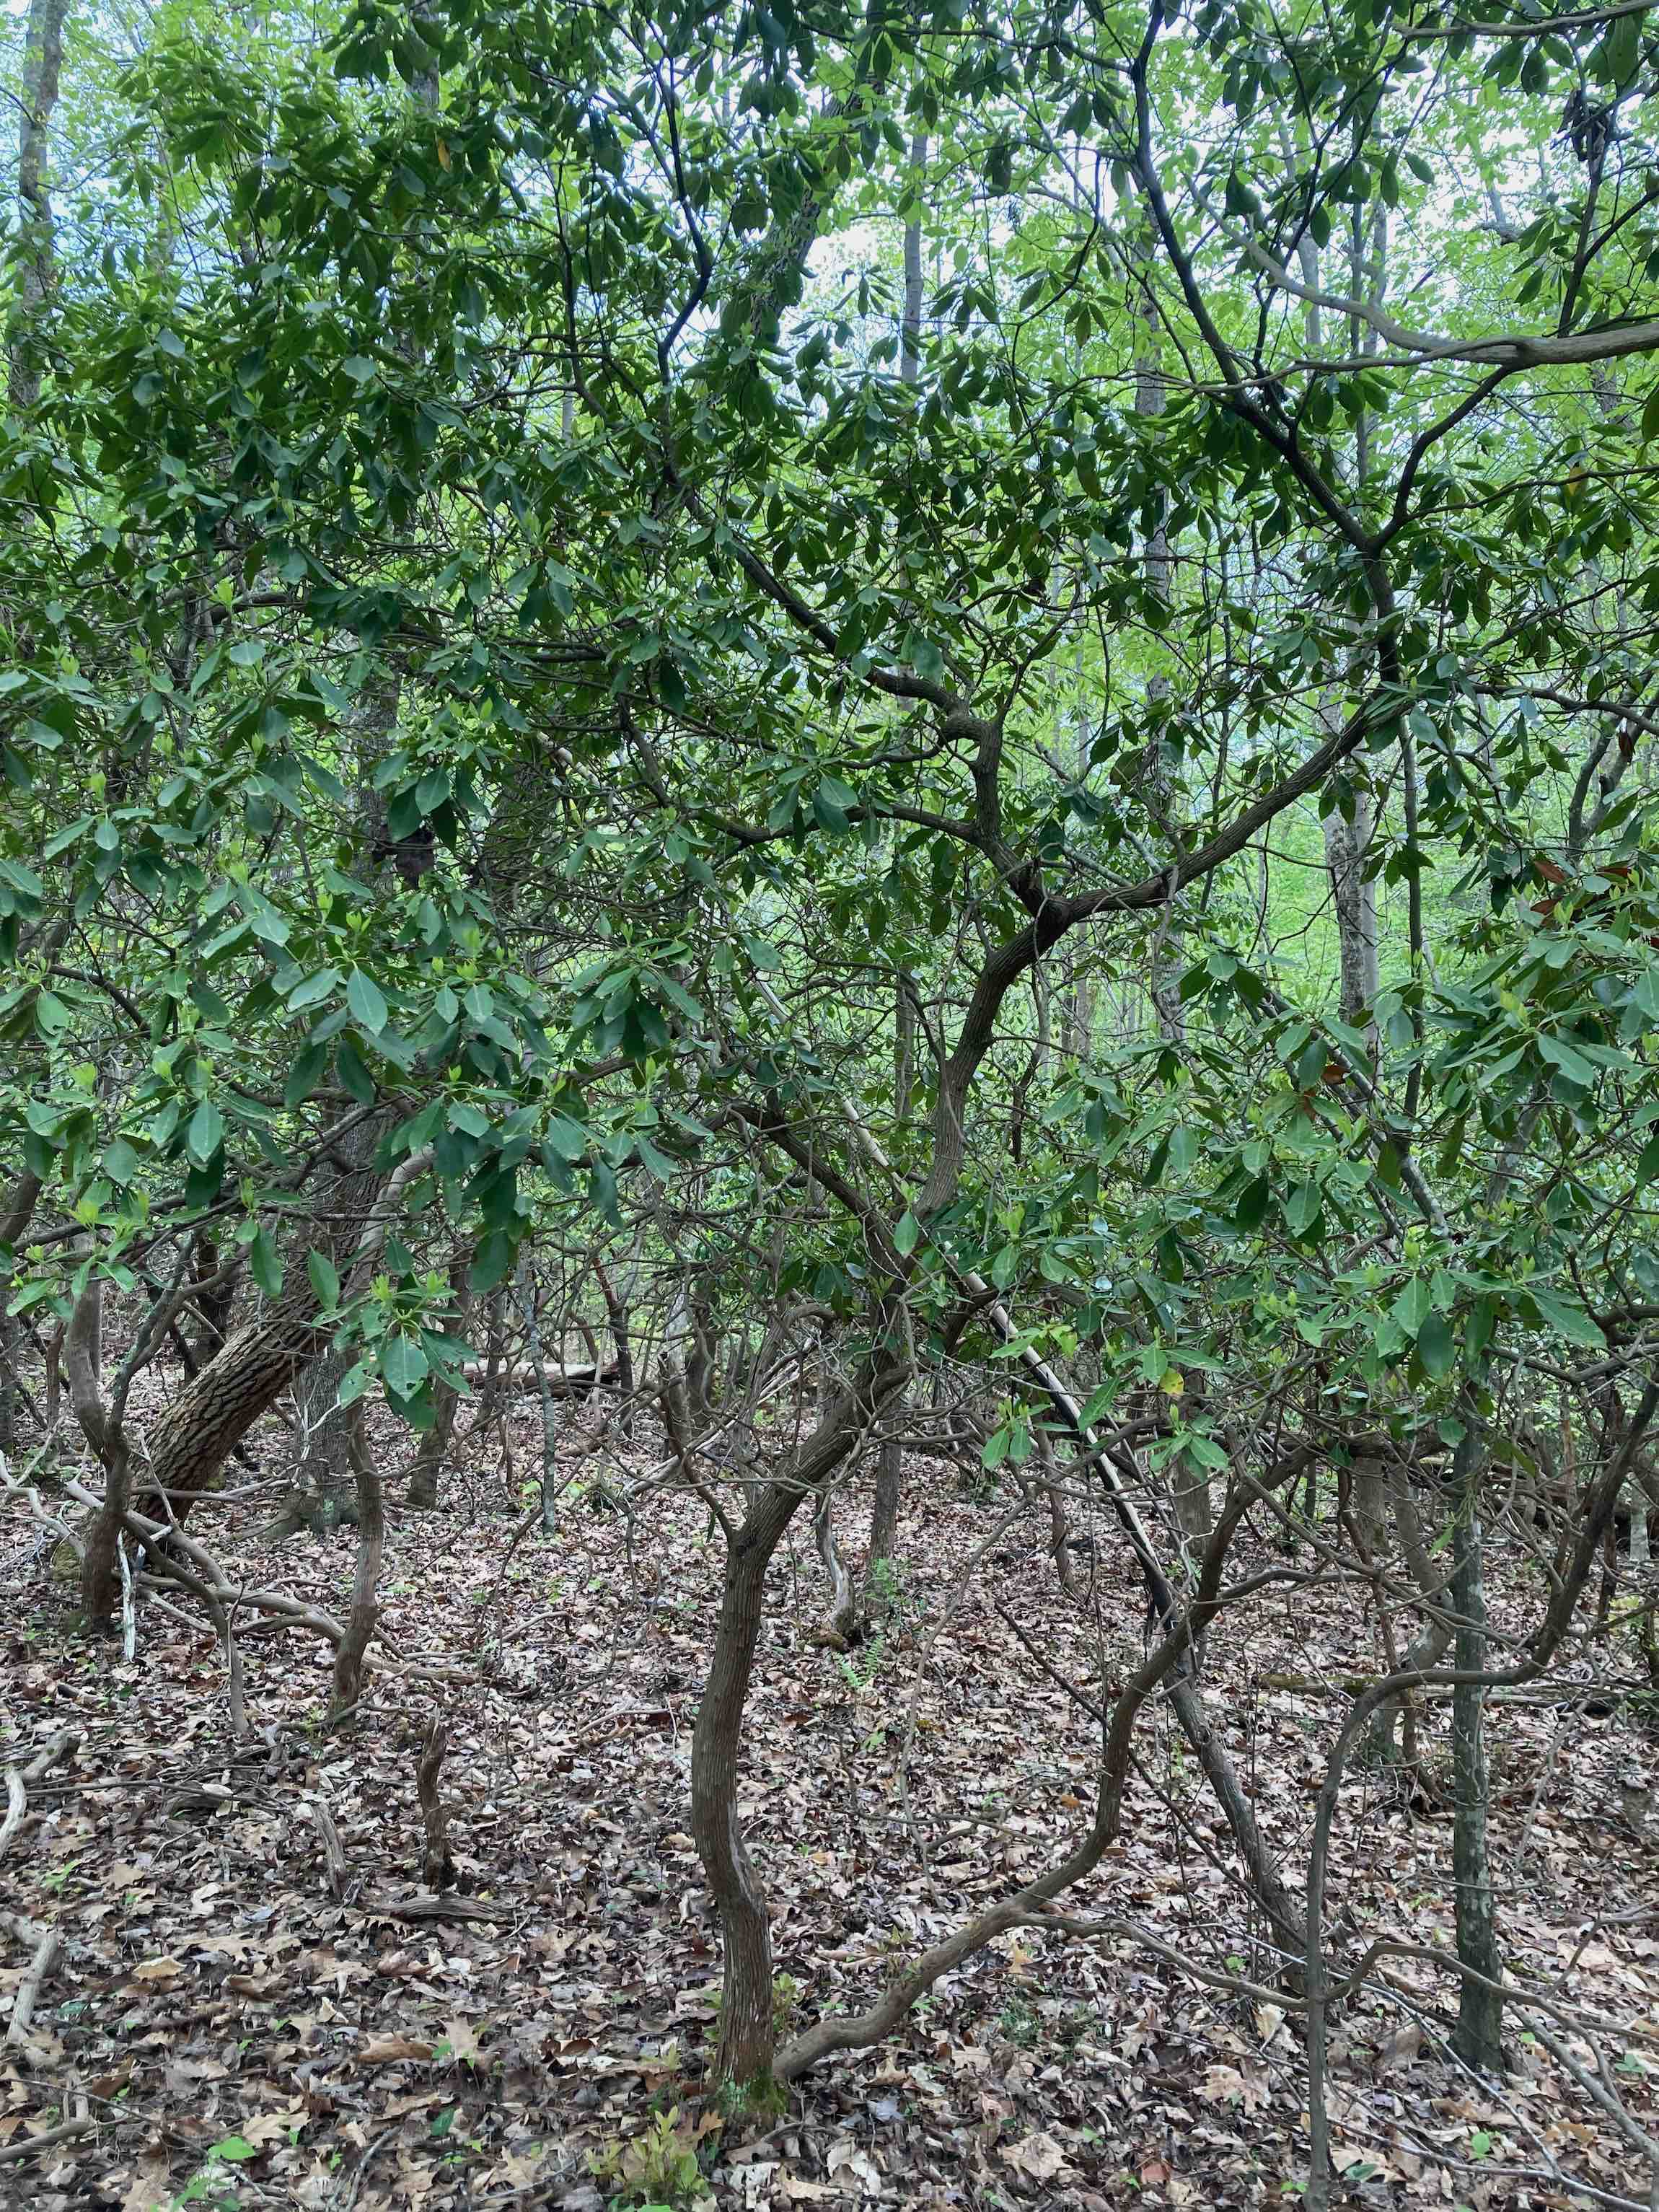 The Scientific Name is Kalmia latifolia. You will likely hear them called Mountain Laurel, Ivy, Calico-bush. This picture shows the Usually grows in dense stands. of Kalmia latifolia